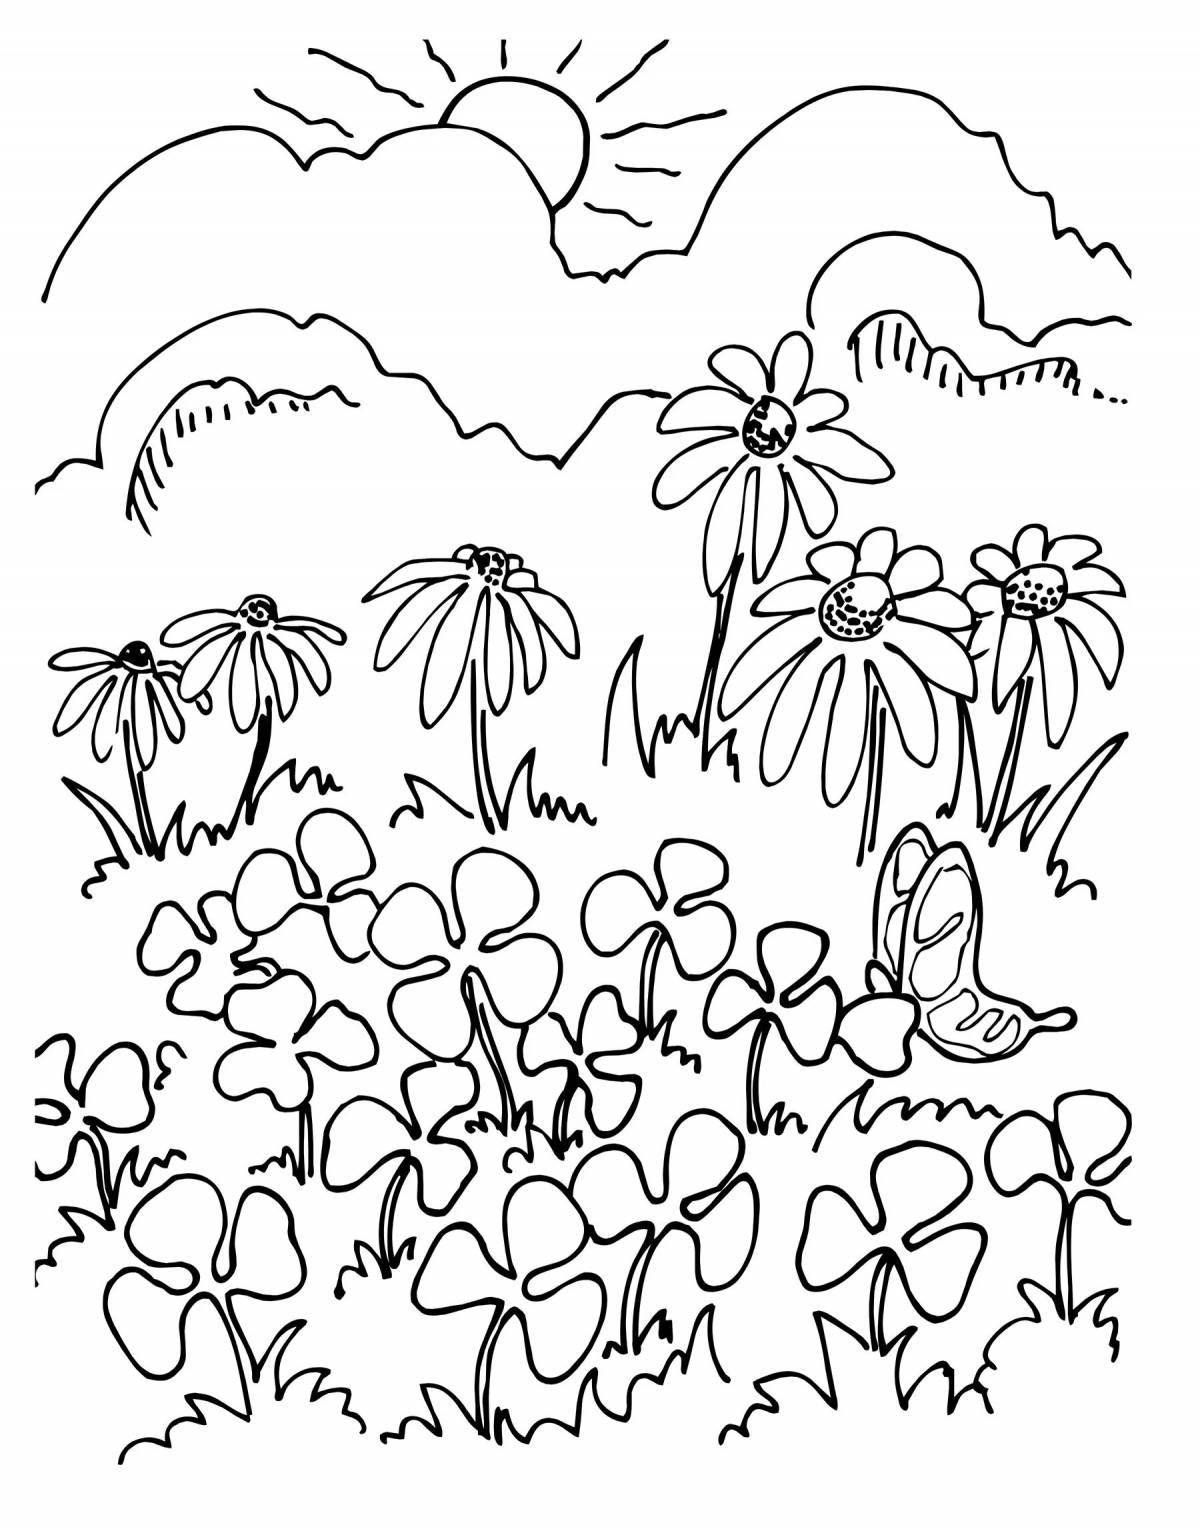 Exquisite forest glade coloring page